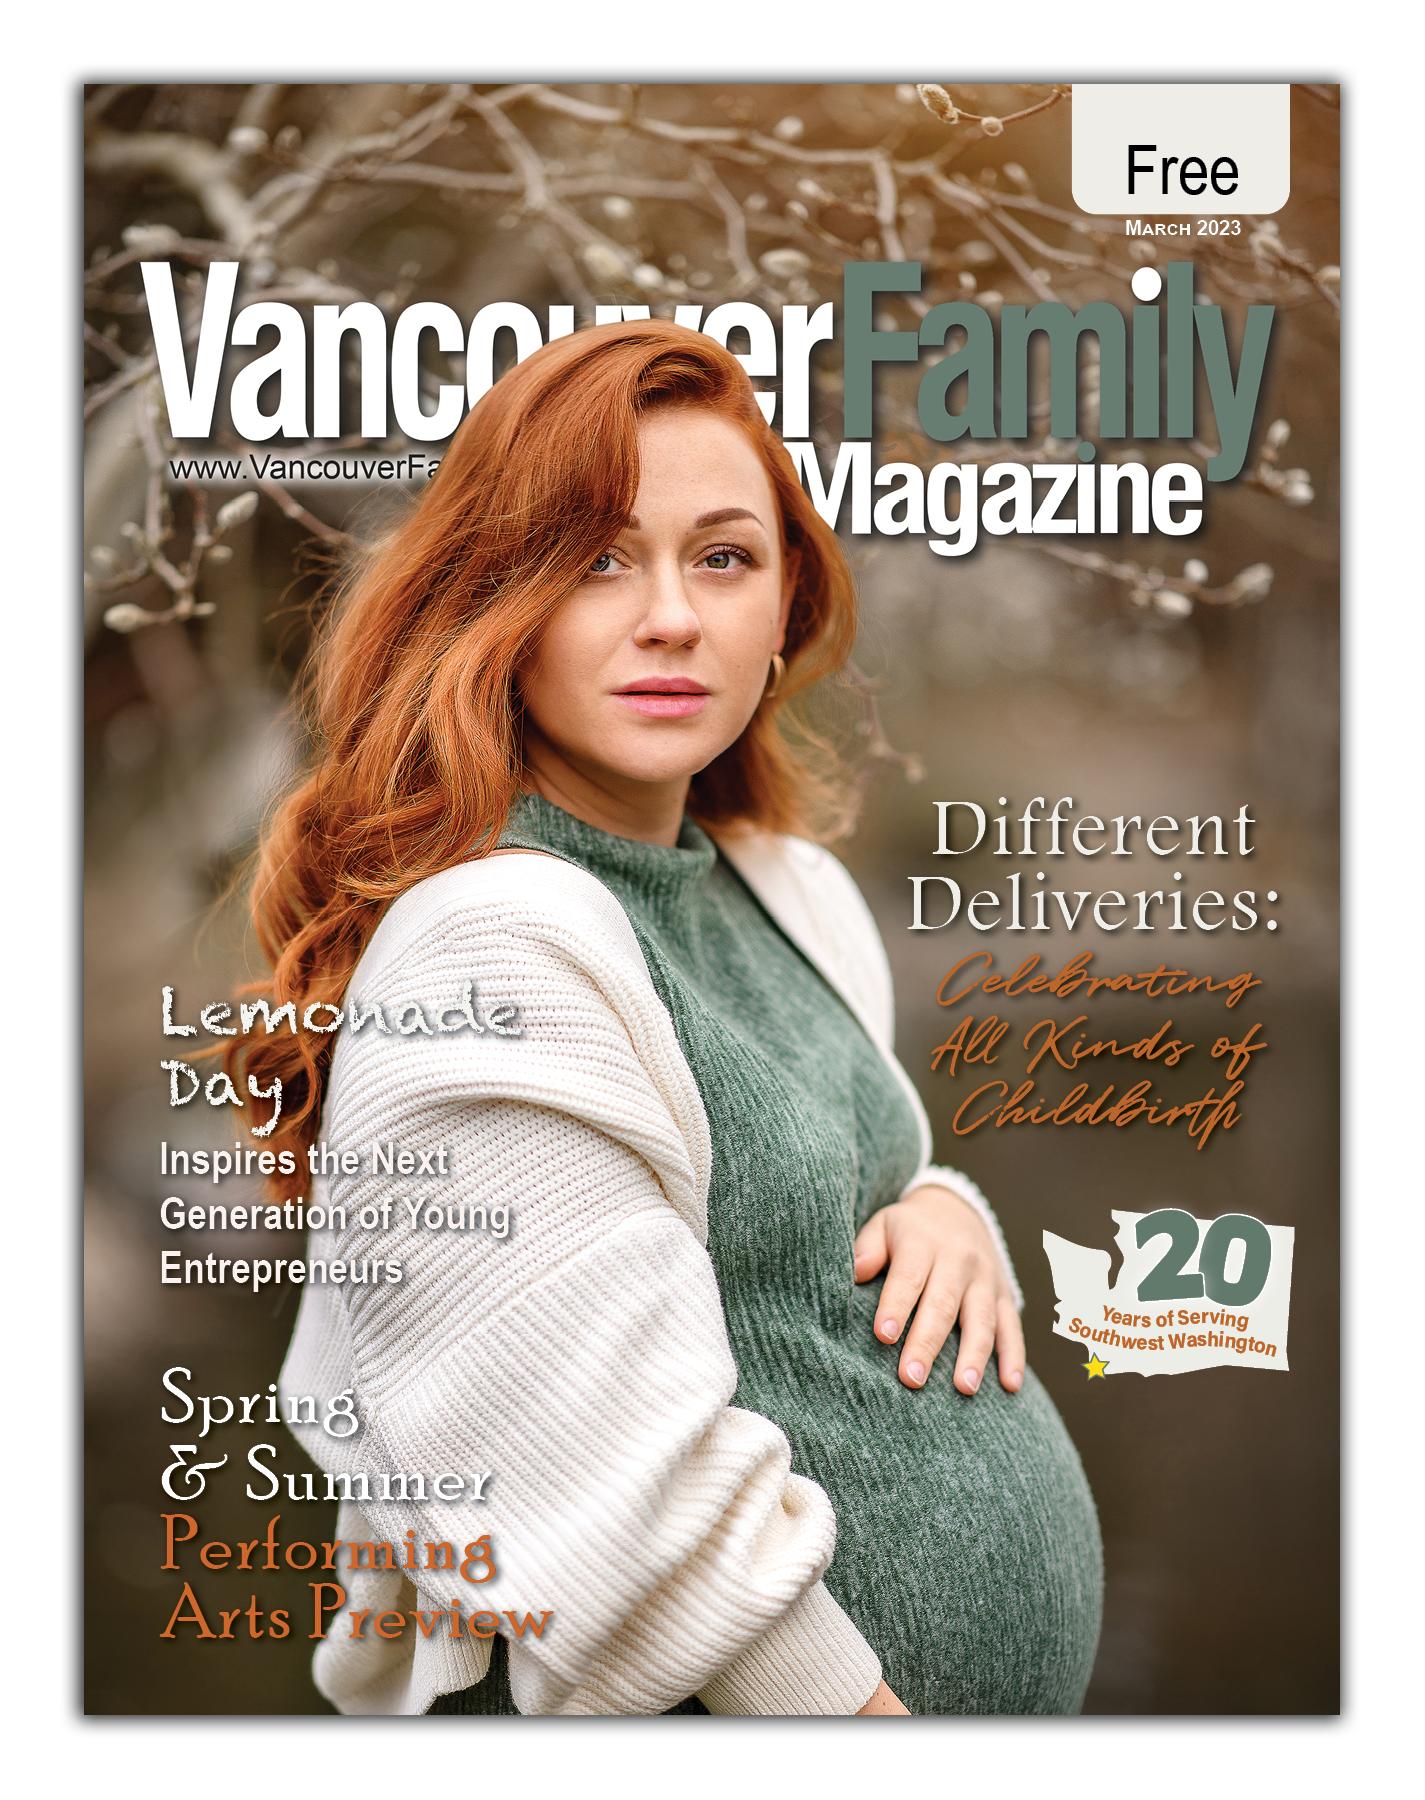 Vancouver Family Magazine's March 2023 cover features a pregnant woman with long red hair